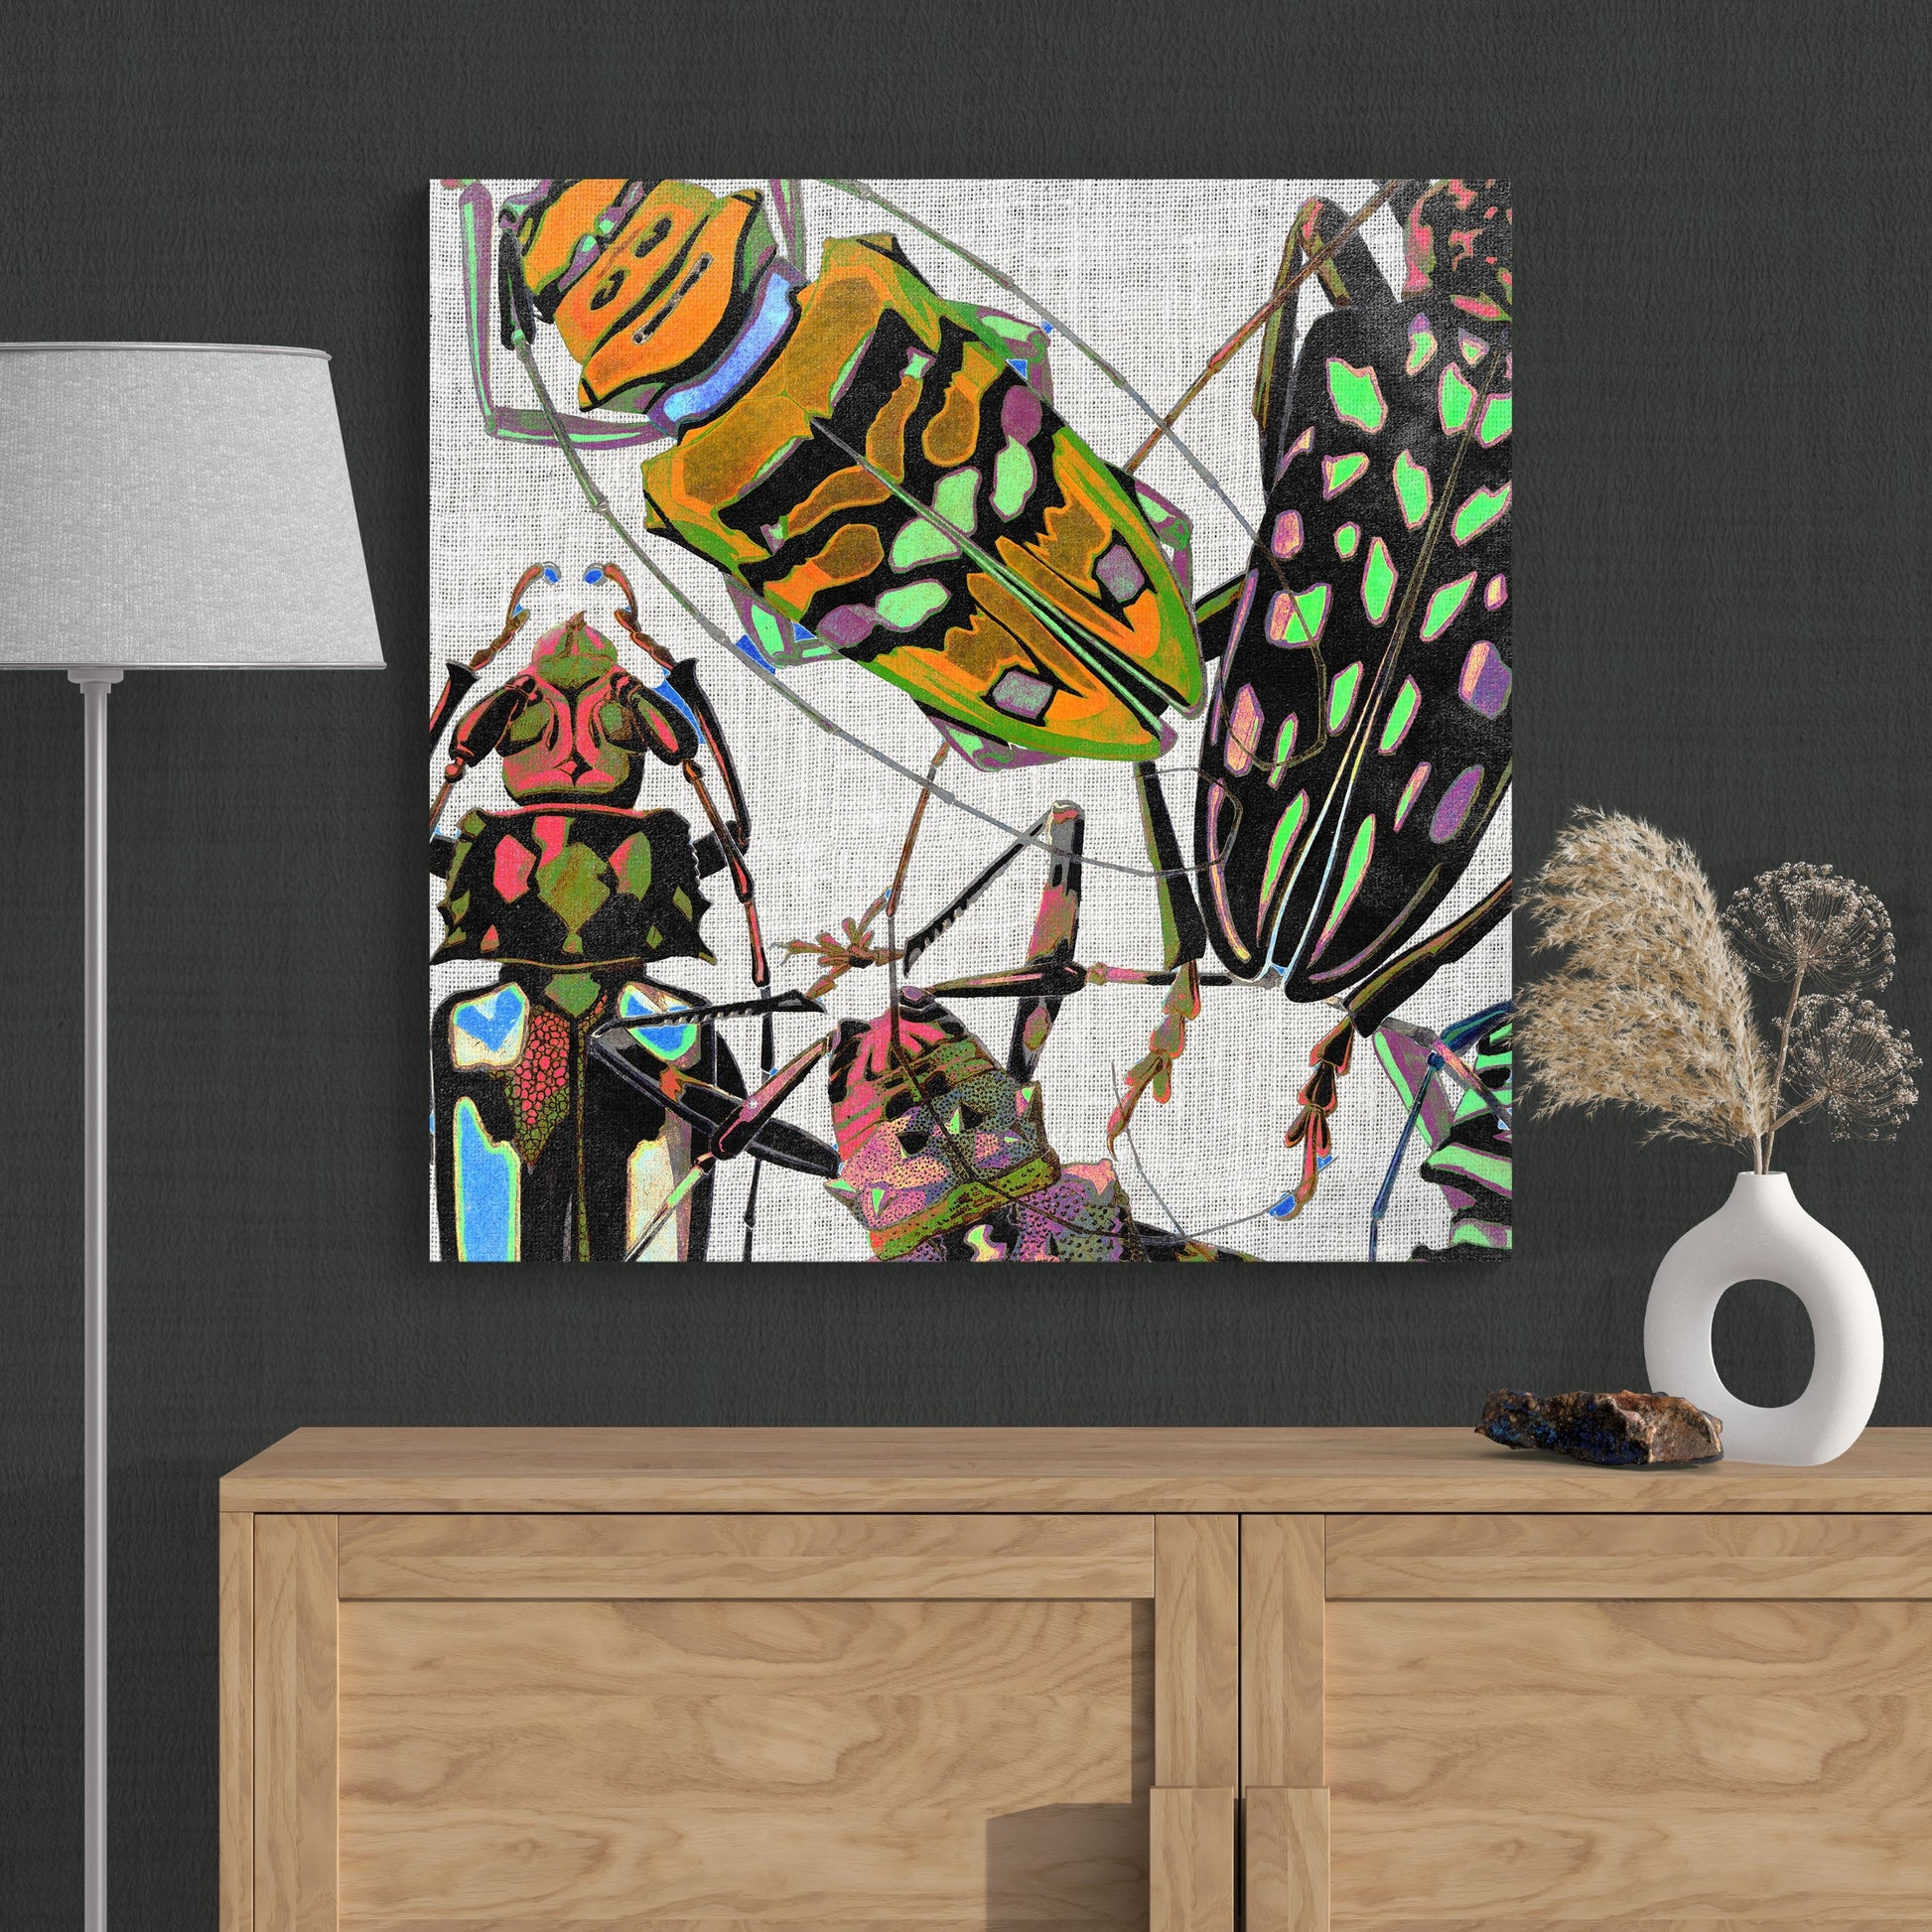 Abstract Insects Beetle Collage - Colorful Nature Canvas Wall Art - Retro Reverence